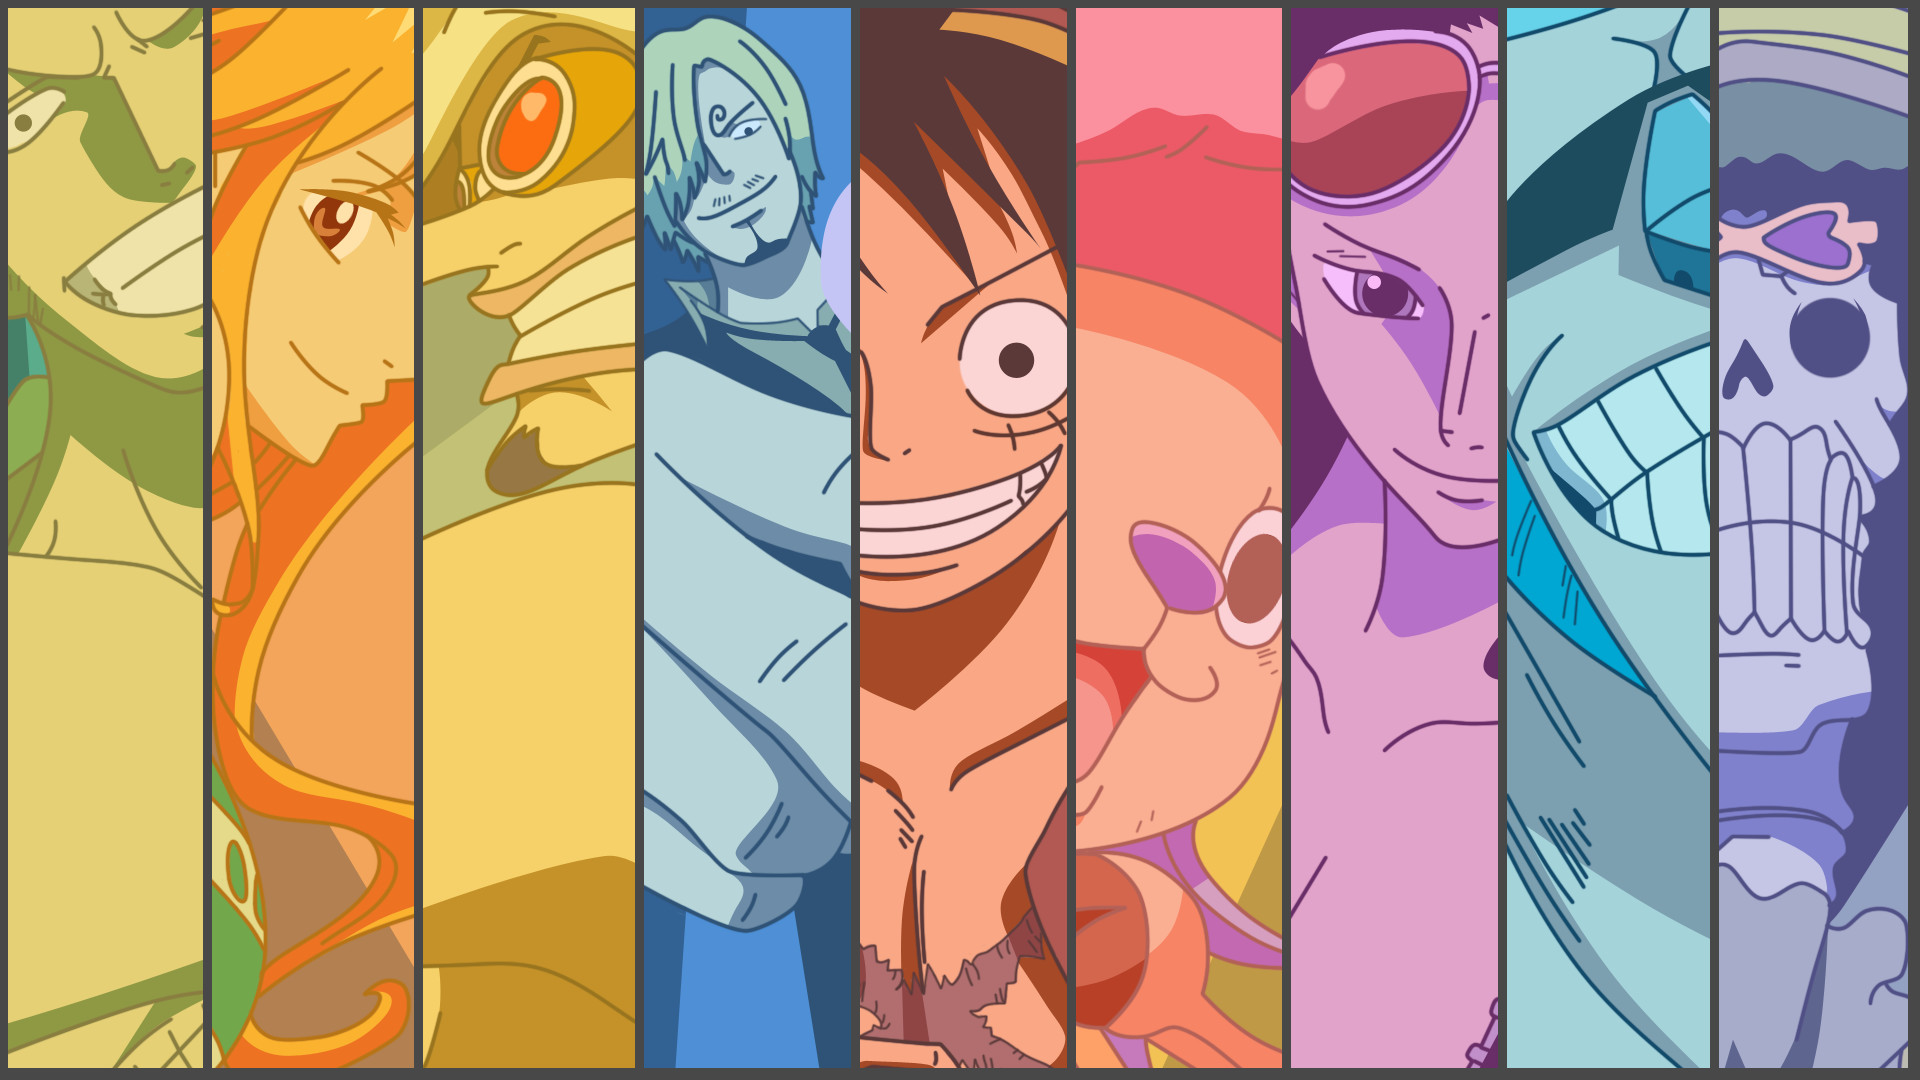 Straw Hat Pirates from One Piece Film Red 4K wallpaper download